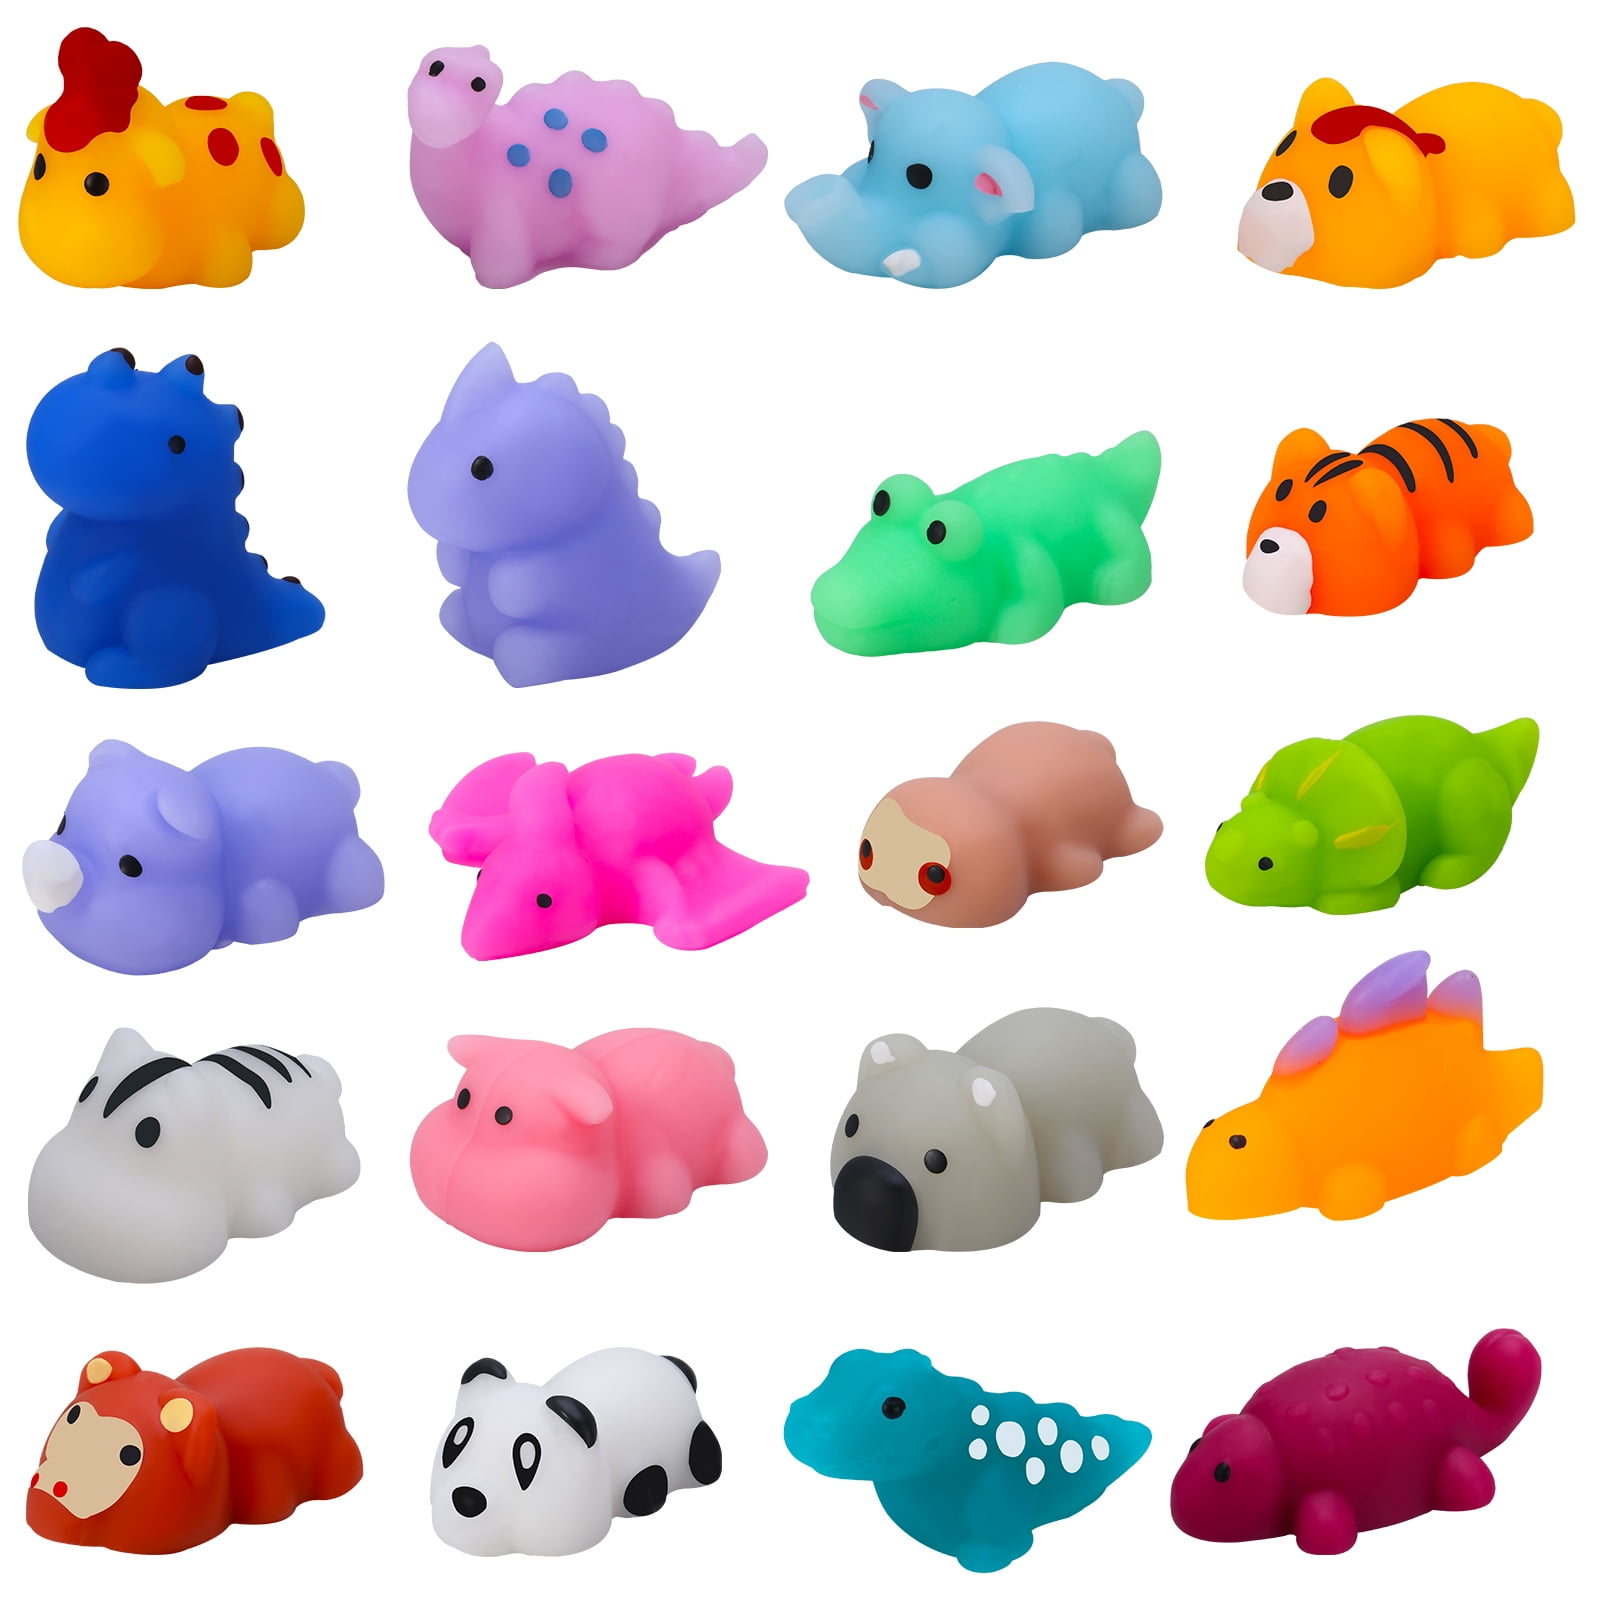 MMTX Squishy Toy 4pcs, Kawaii Soft Squishy Toy, Galaxy Squishies Slow  Rising Animal Squishy Toys, Anti Stress Fidget Compressive Toy Squeeze for  Kids and Adults 